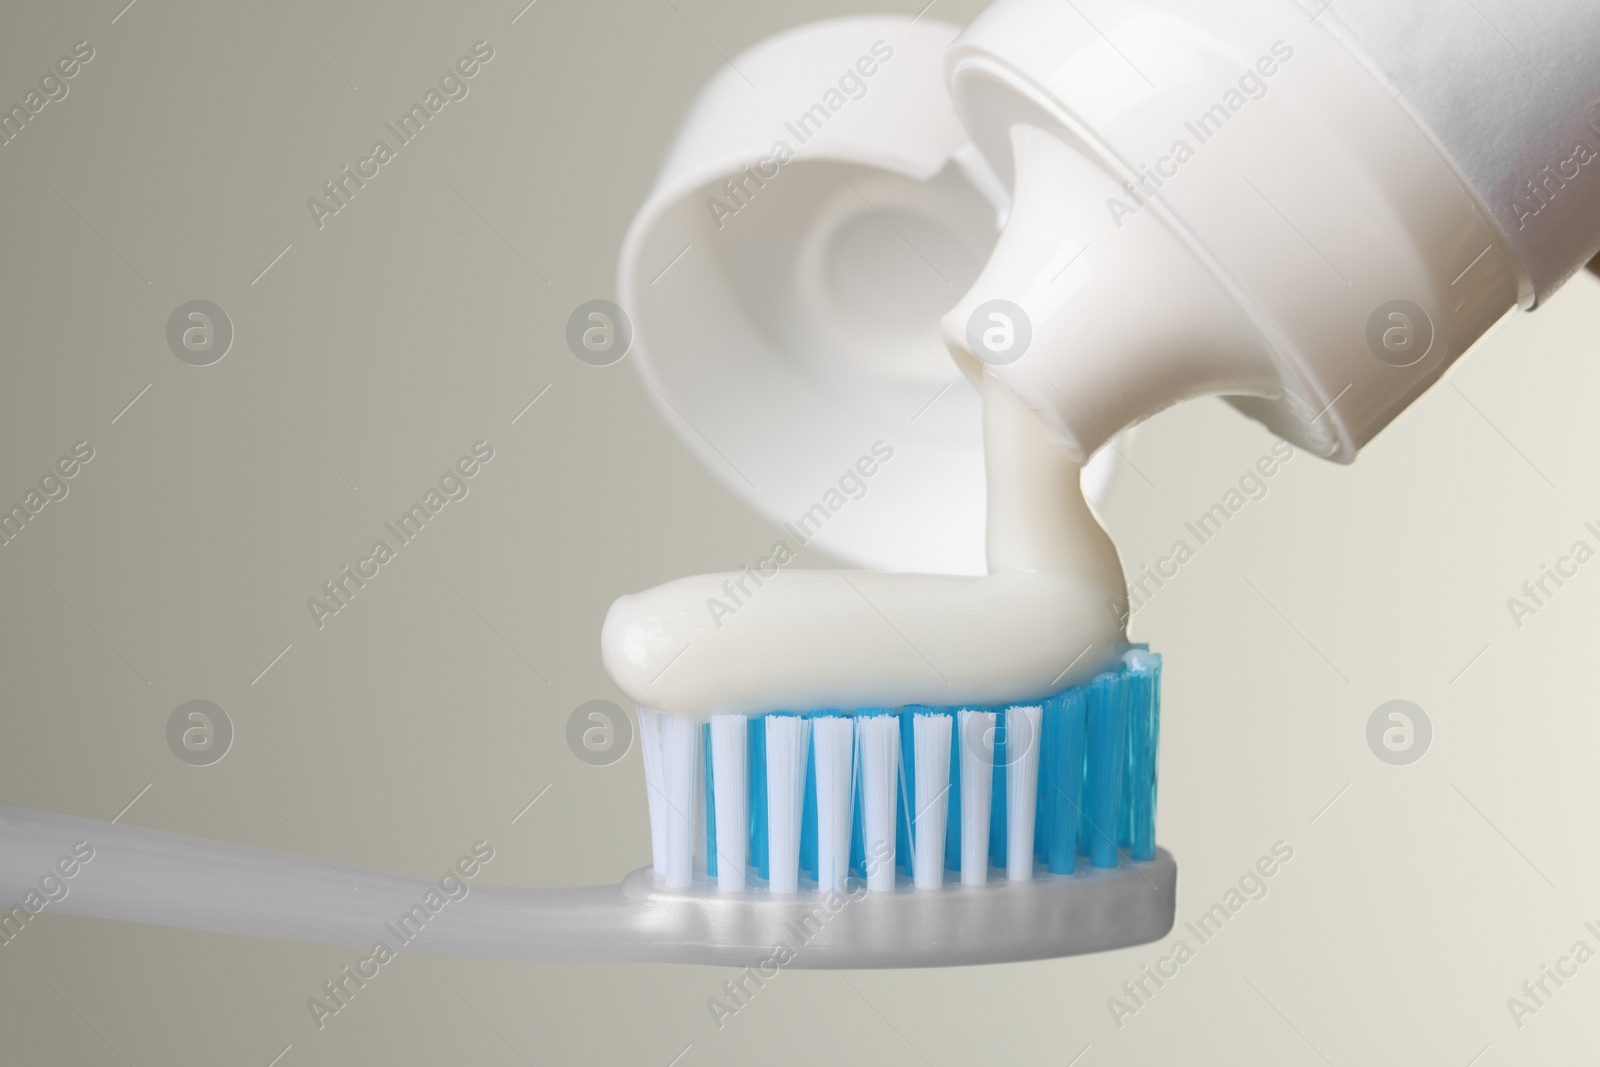 Photo of Applying paste on toothbrush against light background, closeup